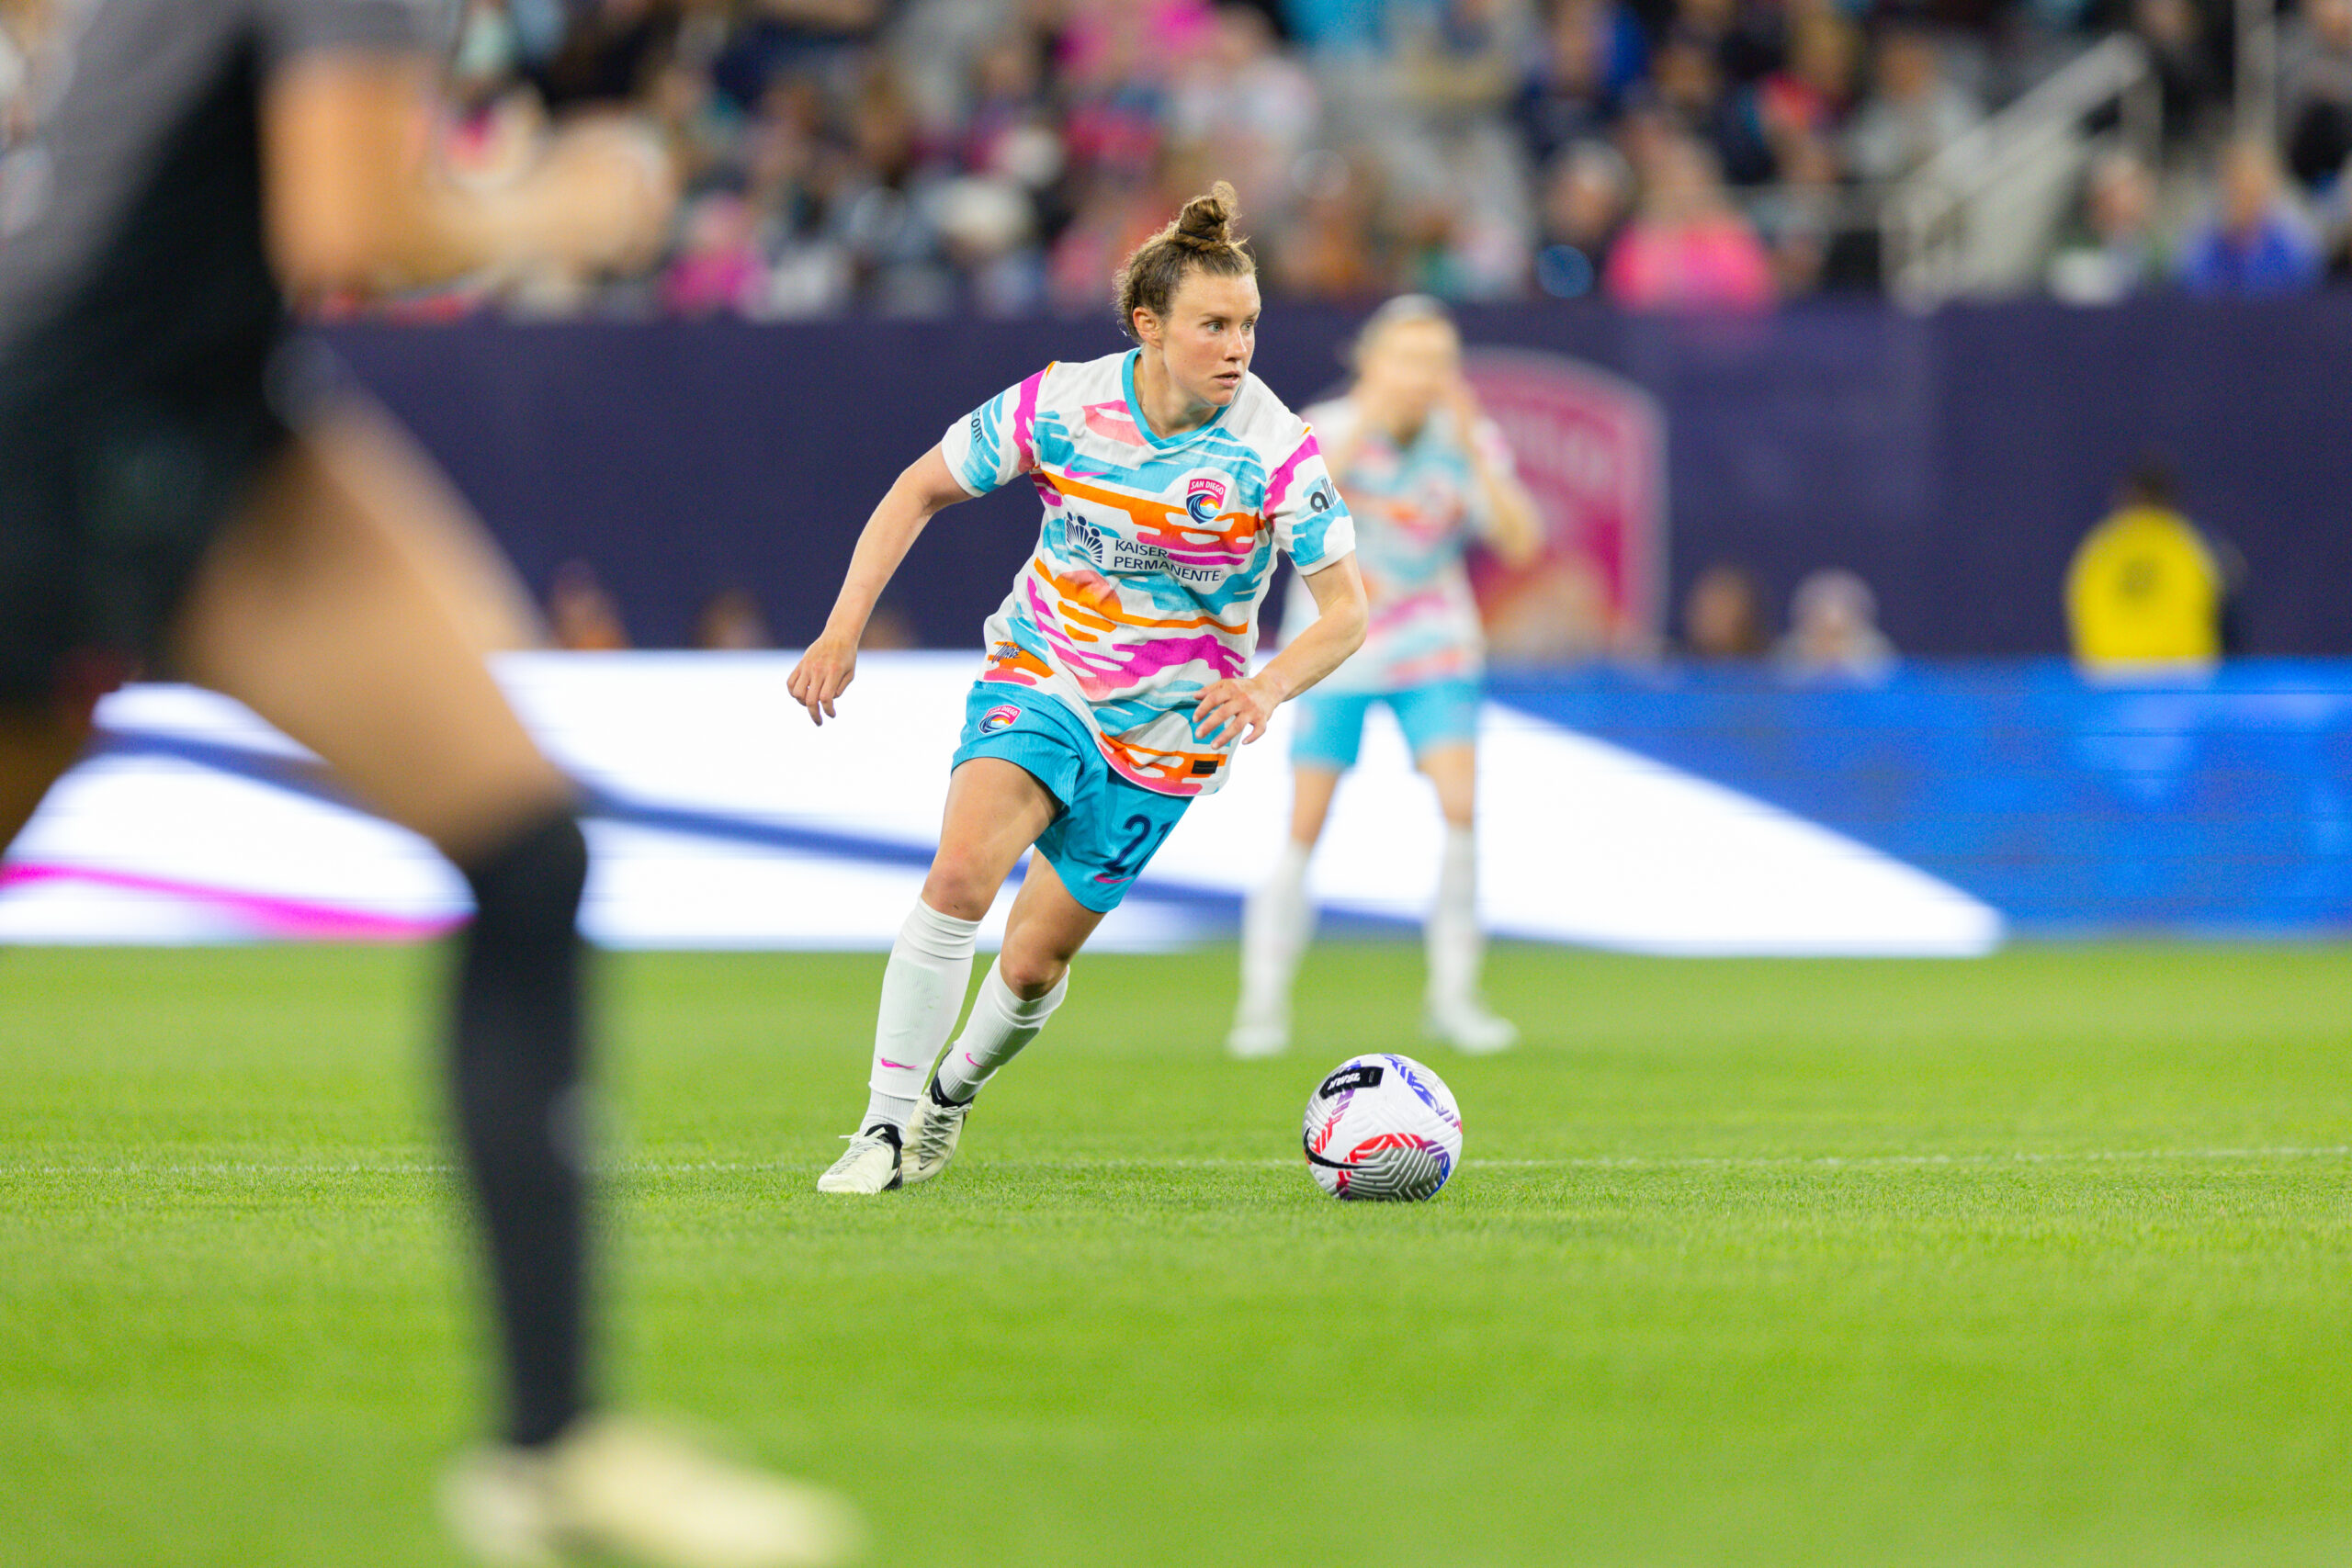 MATCH PREVIEW: San Diego vs. Seattle Reign